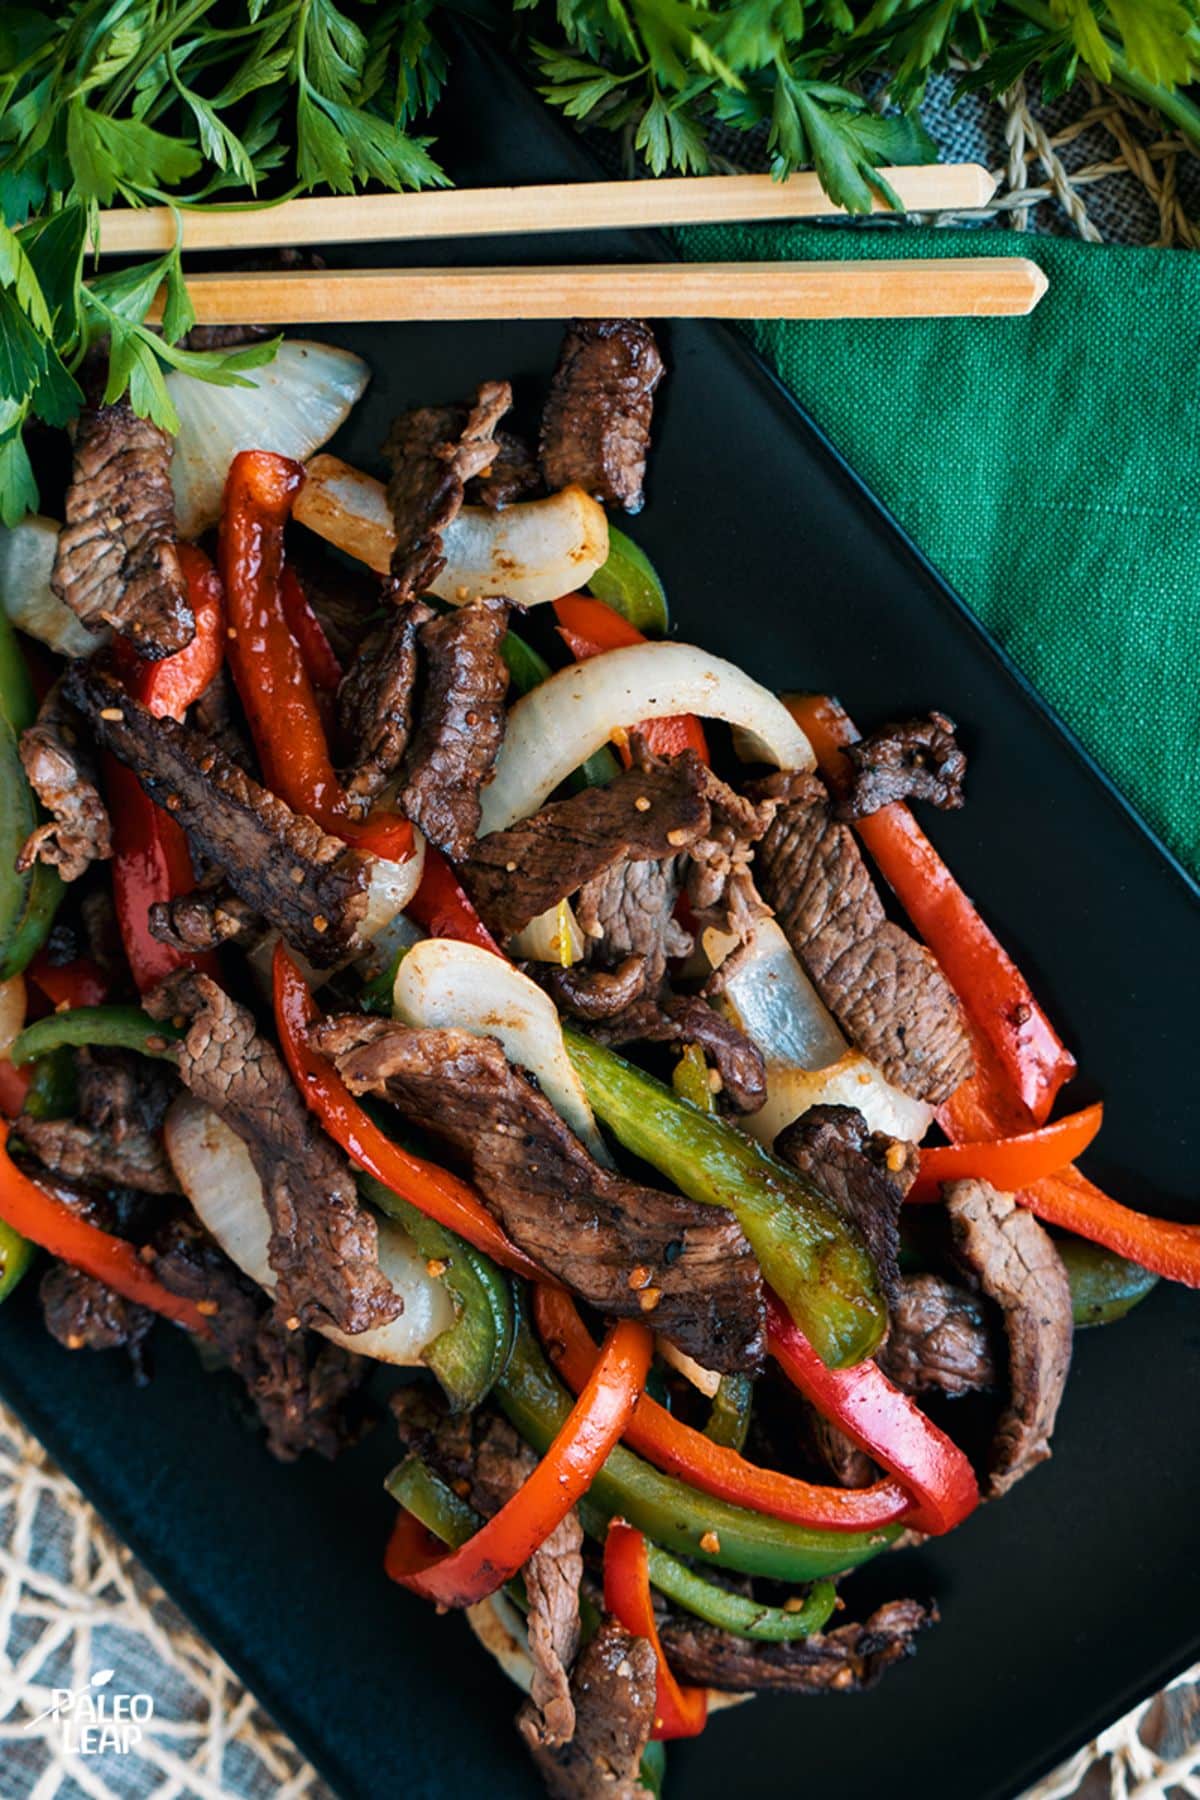 Steak And Pepper Skillet on a black tray.